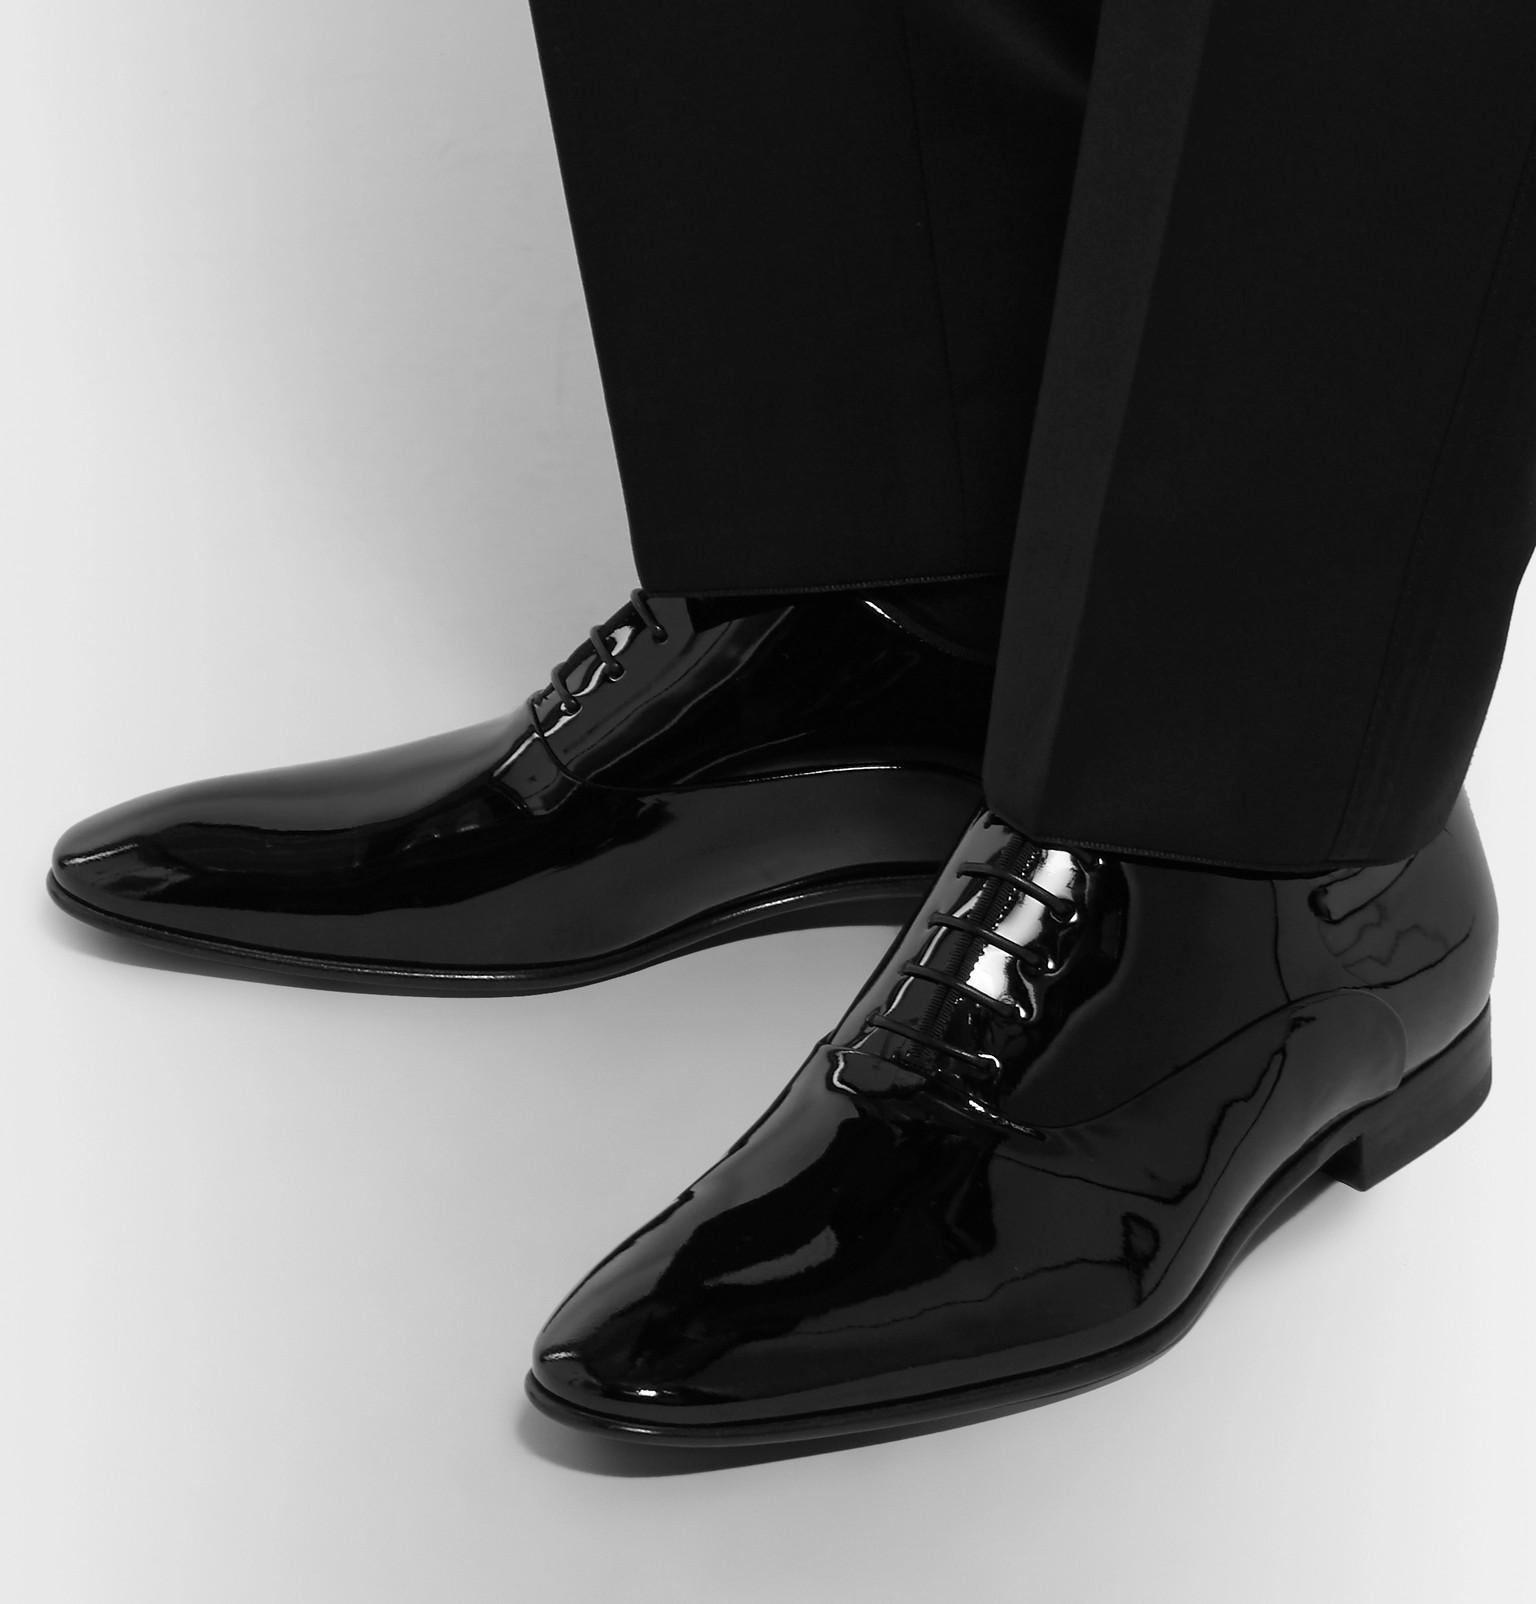 Hugo Boss Patent Leather Oxford Shoes 